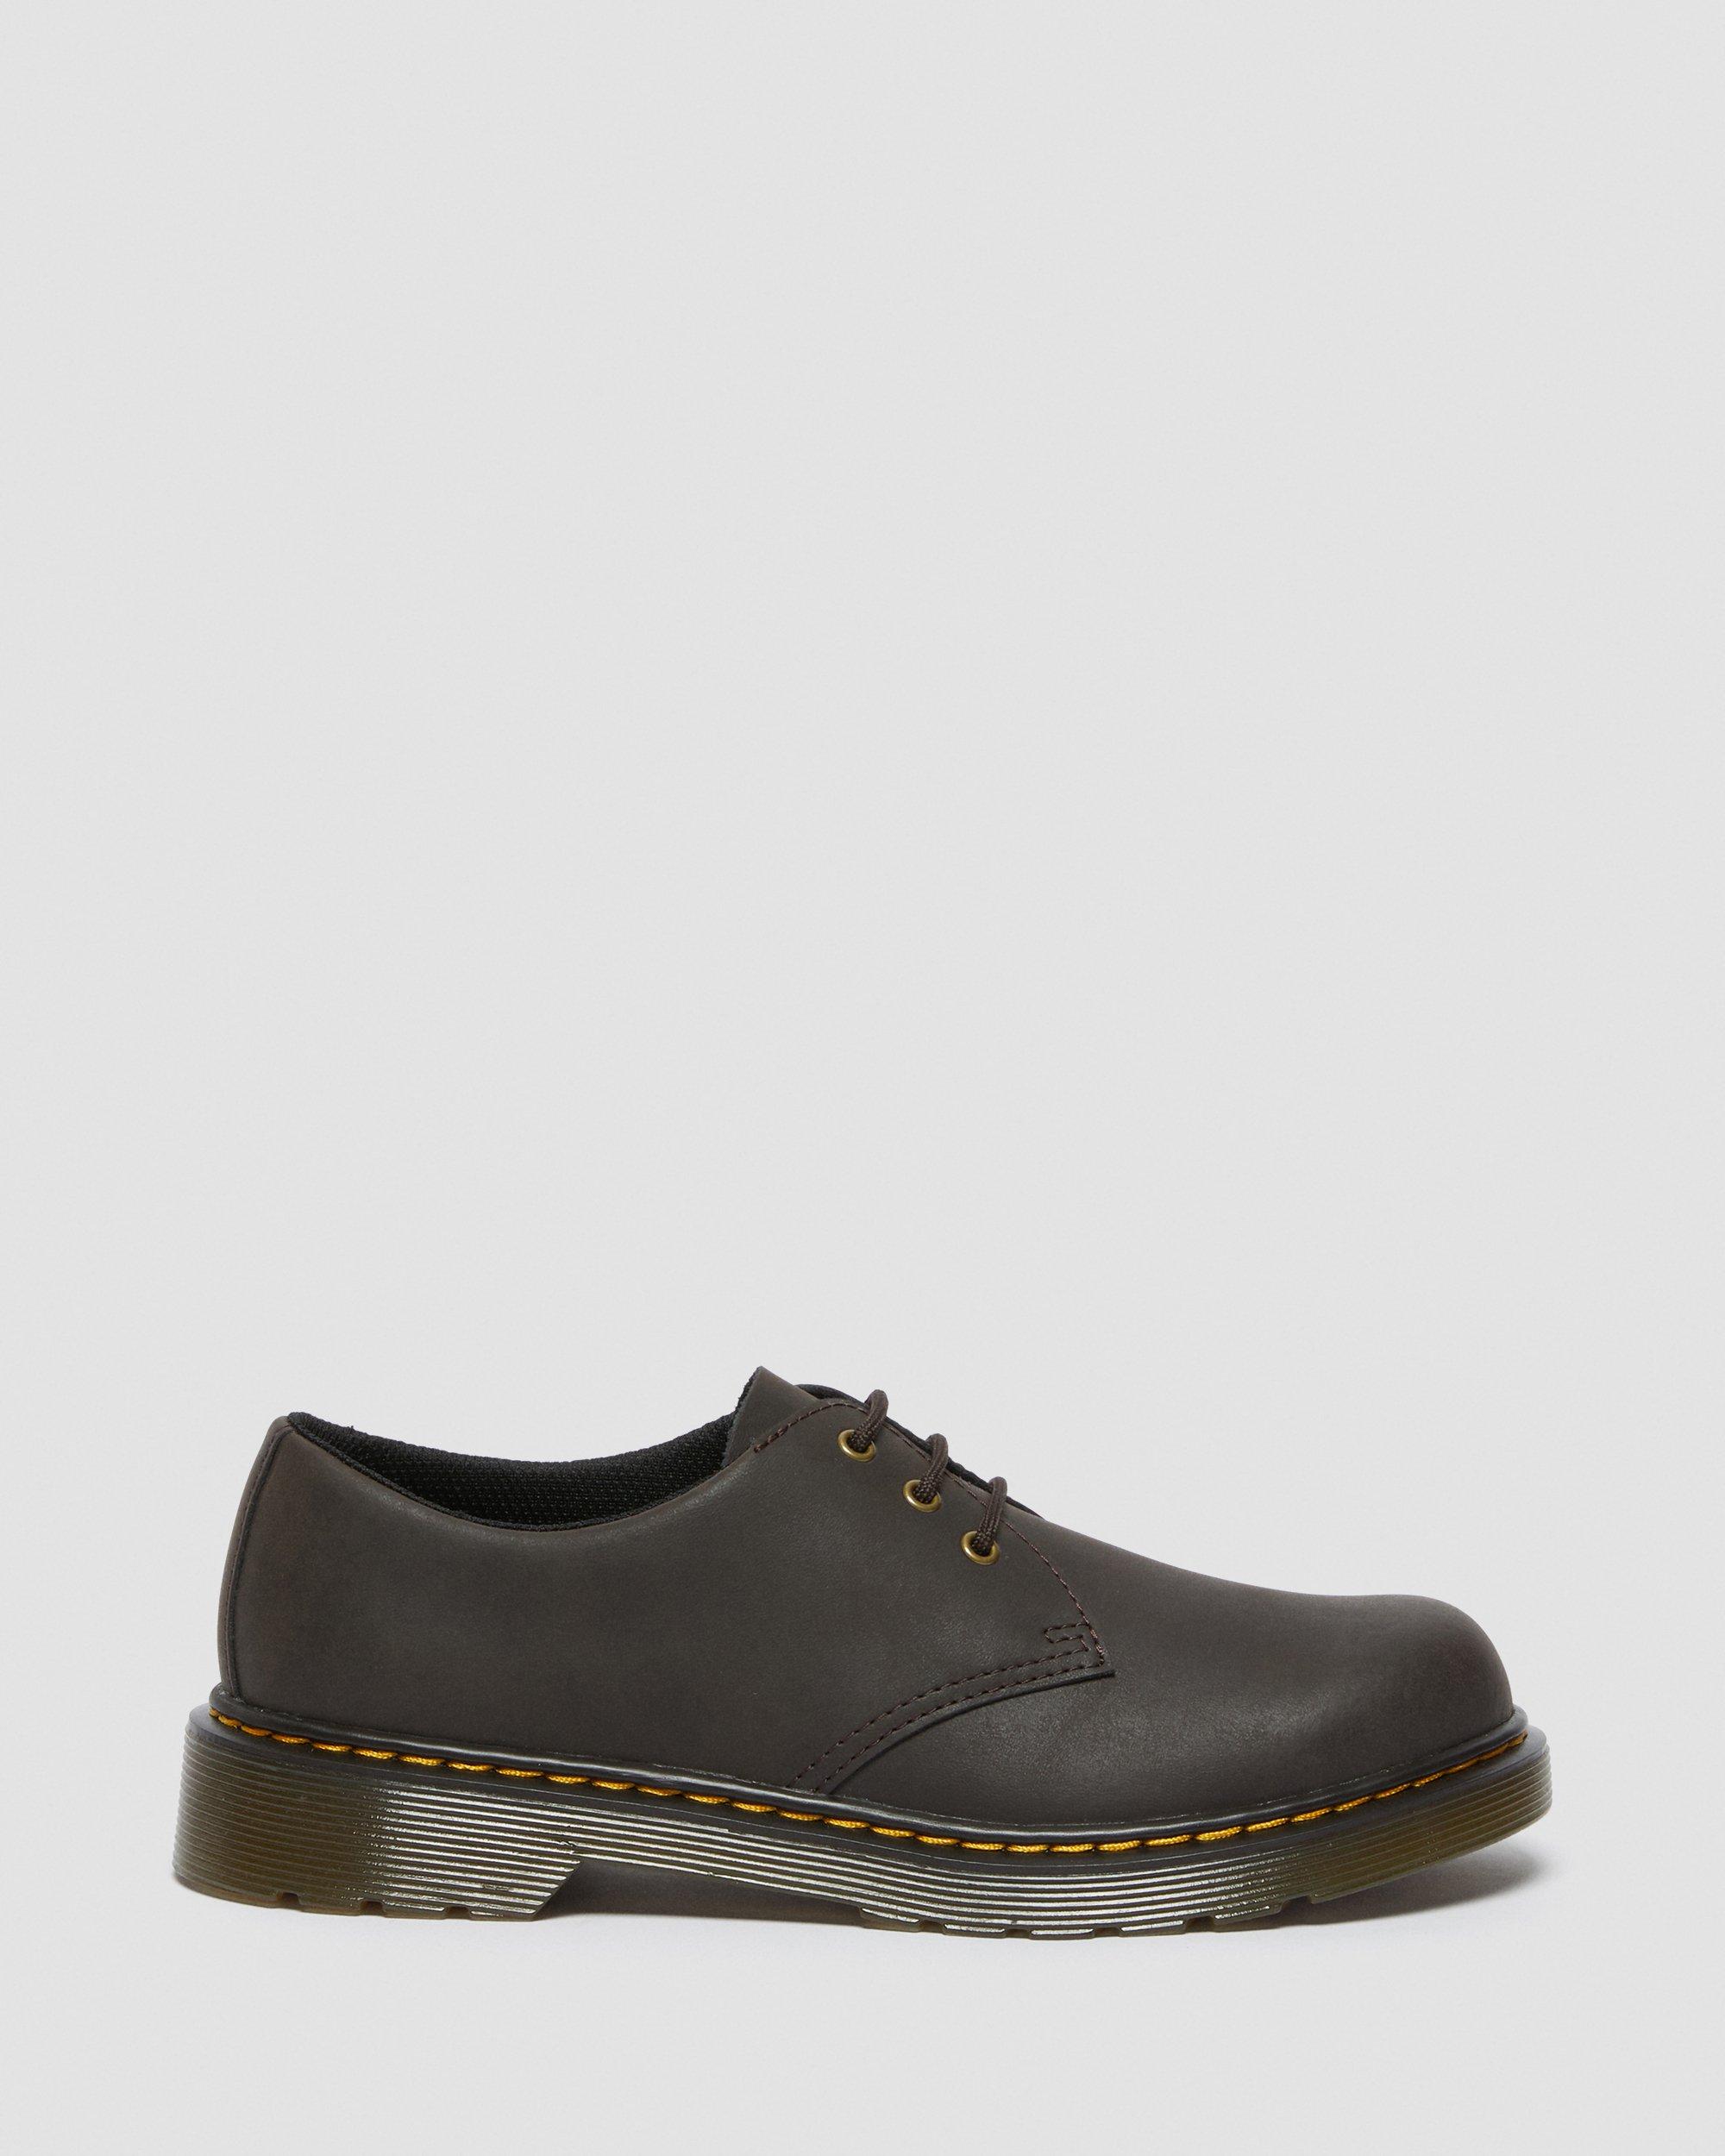 DR MARTENS Youth 1461 Wildhorse Leather Shoes